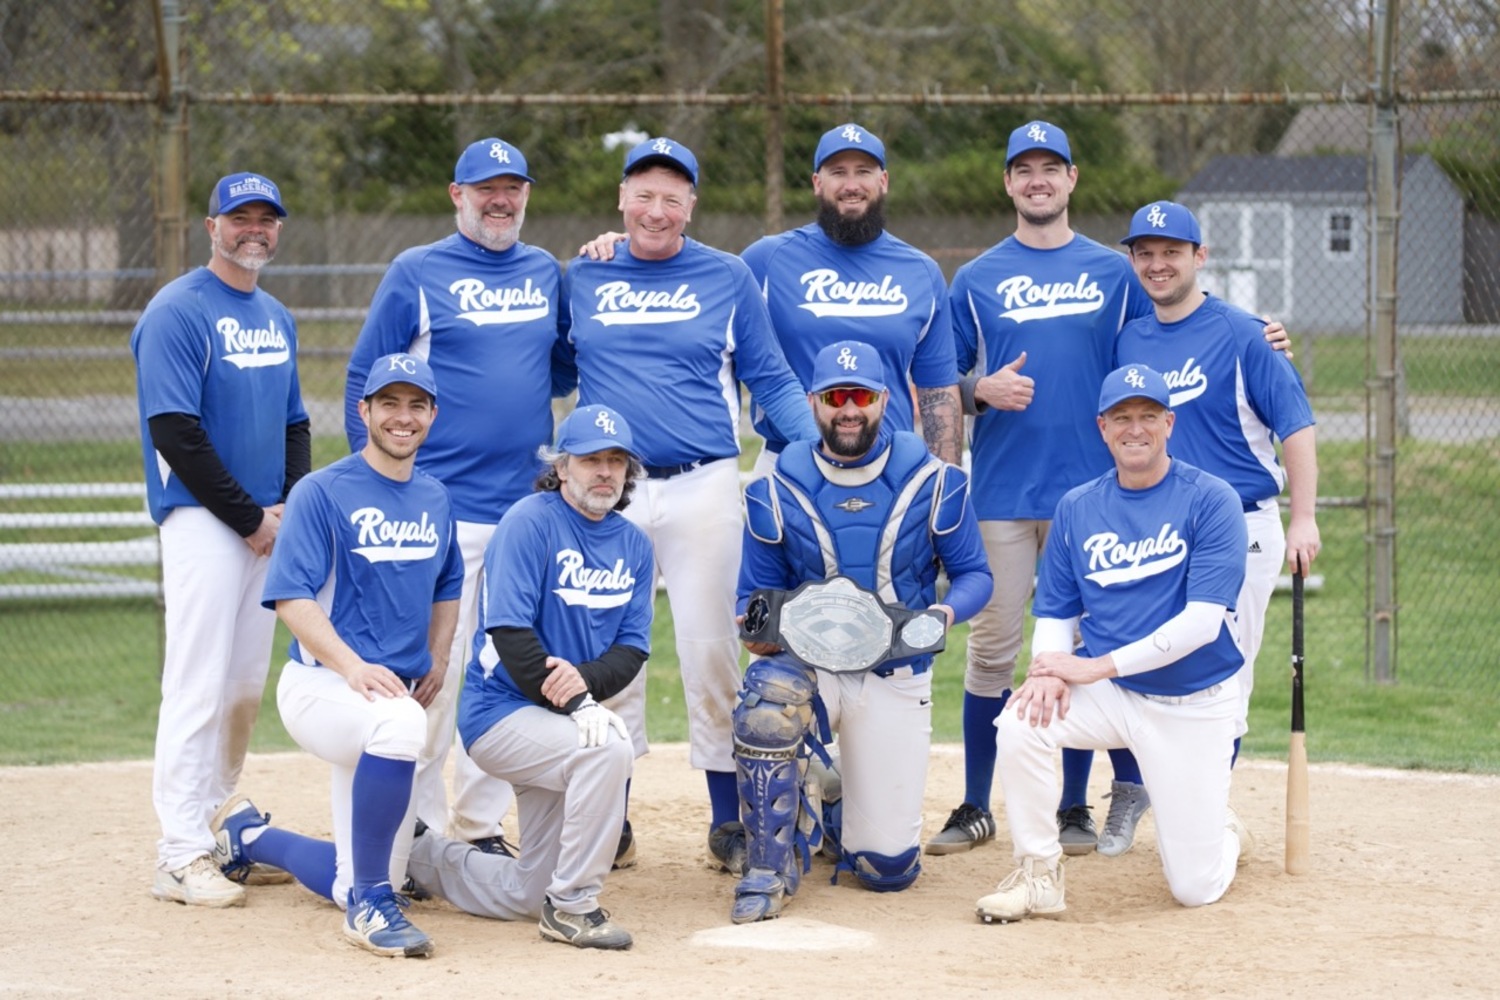 The Sag Harbor Royals won their first-ever Hamptons Adult Hardball Championship after defeating the Harbor Kraken, 8-6, on Sunday morning at Mashashimuet Park in Sag Harbor.  HAMPTONS ADULT HARDBALL